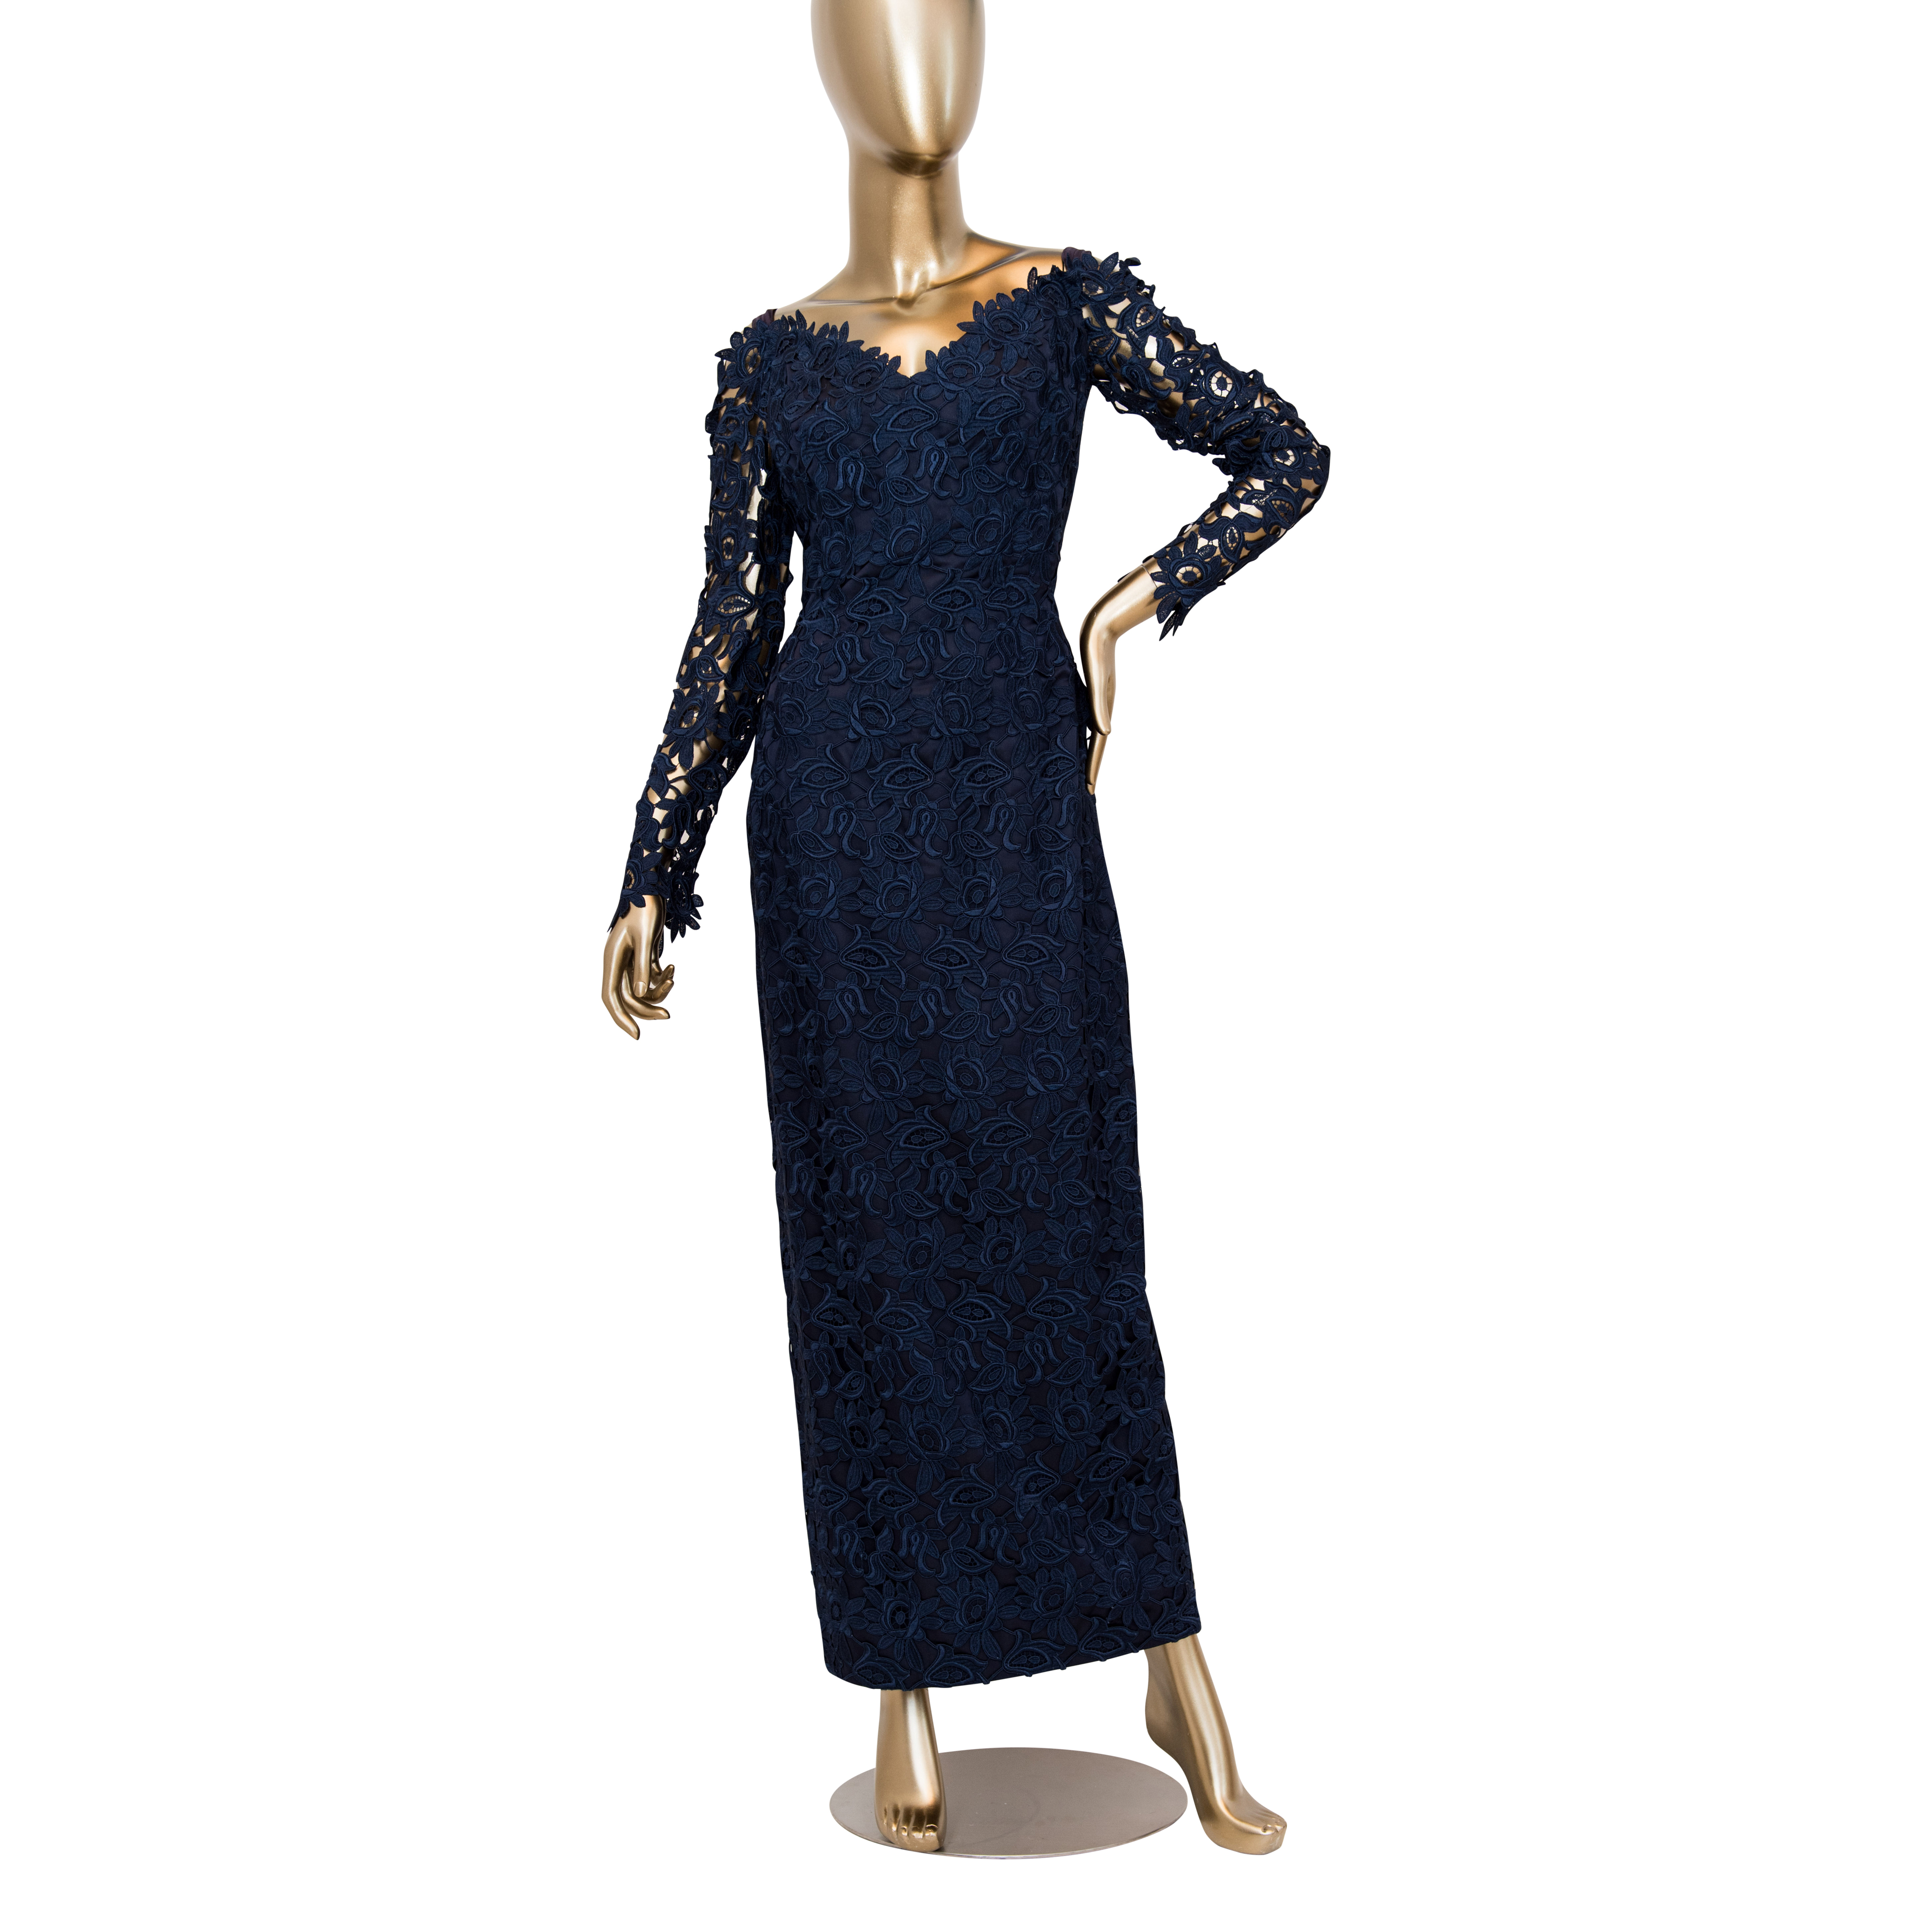 Helen Morley Vintage Long Sleeved Lace Navy Gown - Janet Mandell